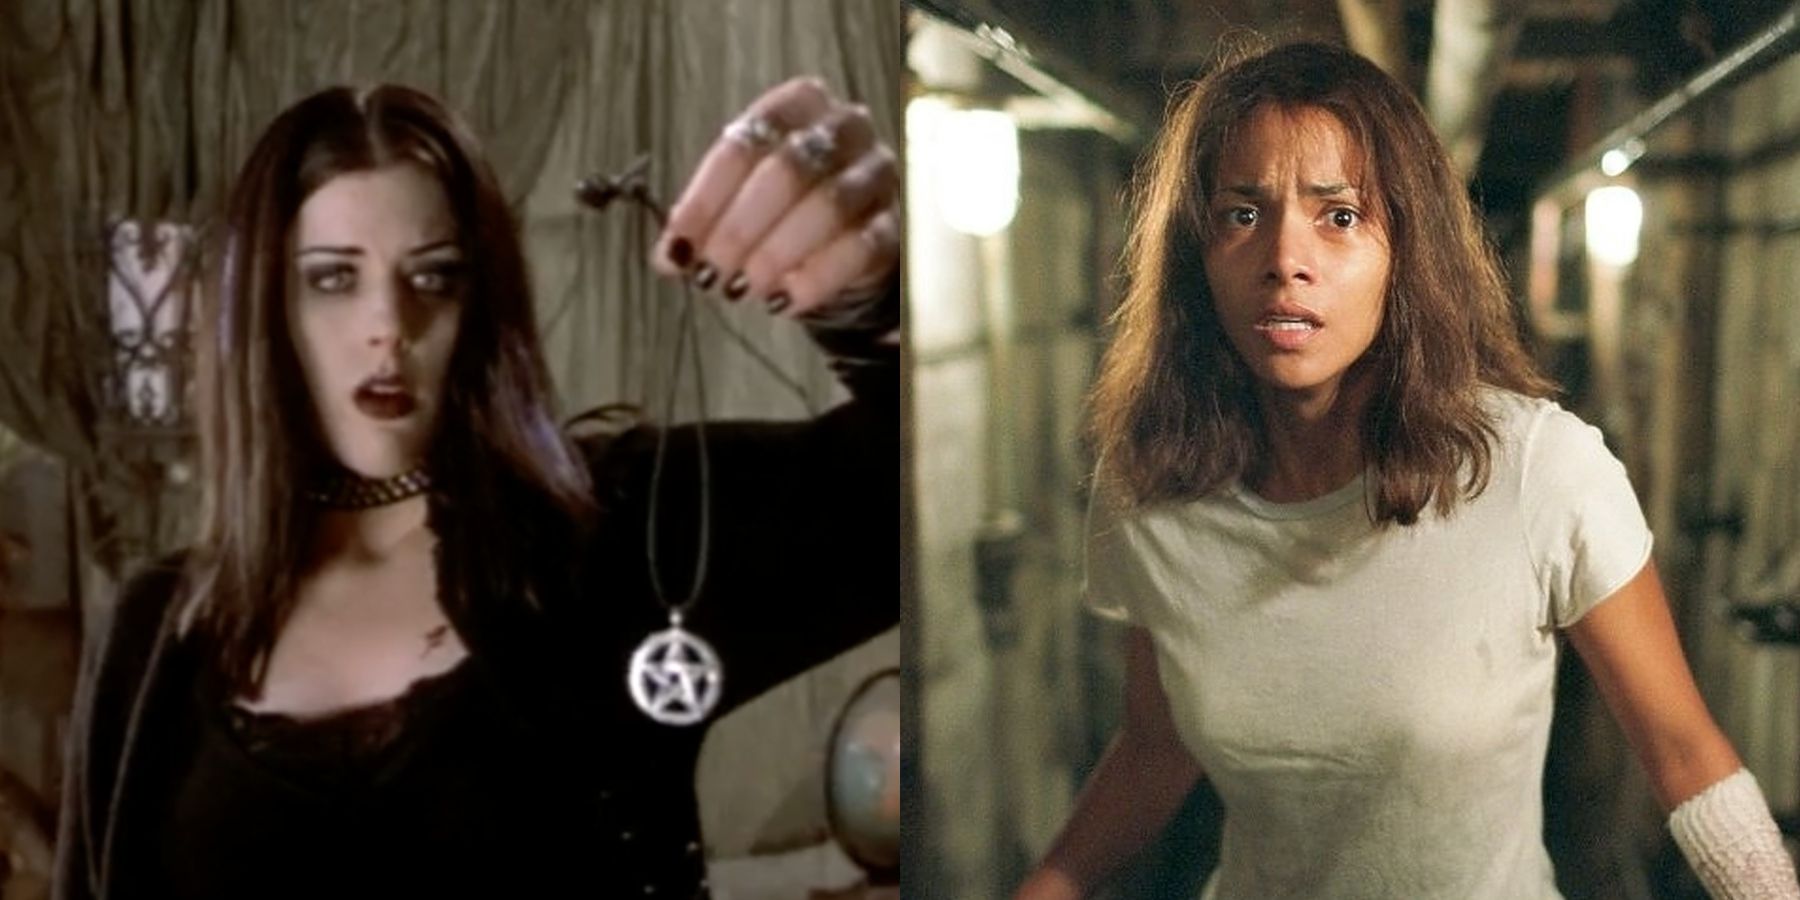 Split image of Kim Director in Book Of Shadows: Blair Witch 2 and Halle Berry in Gothika